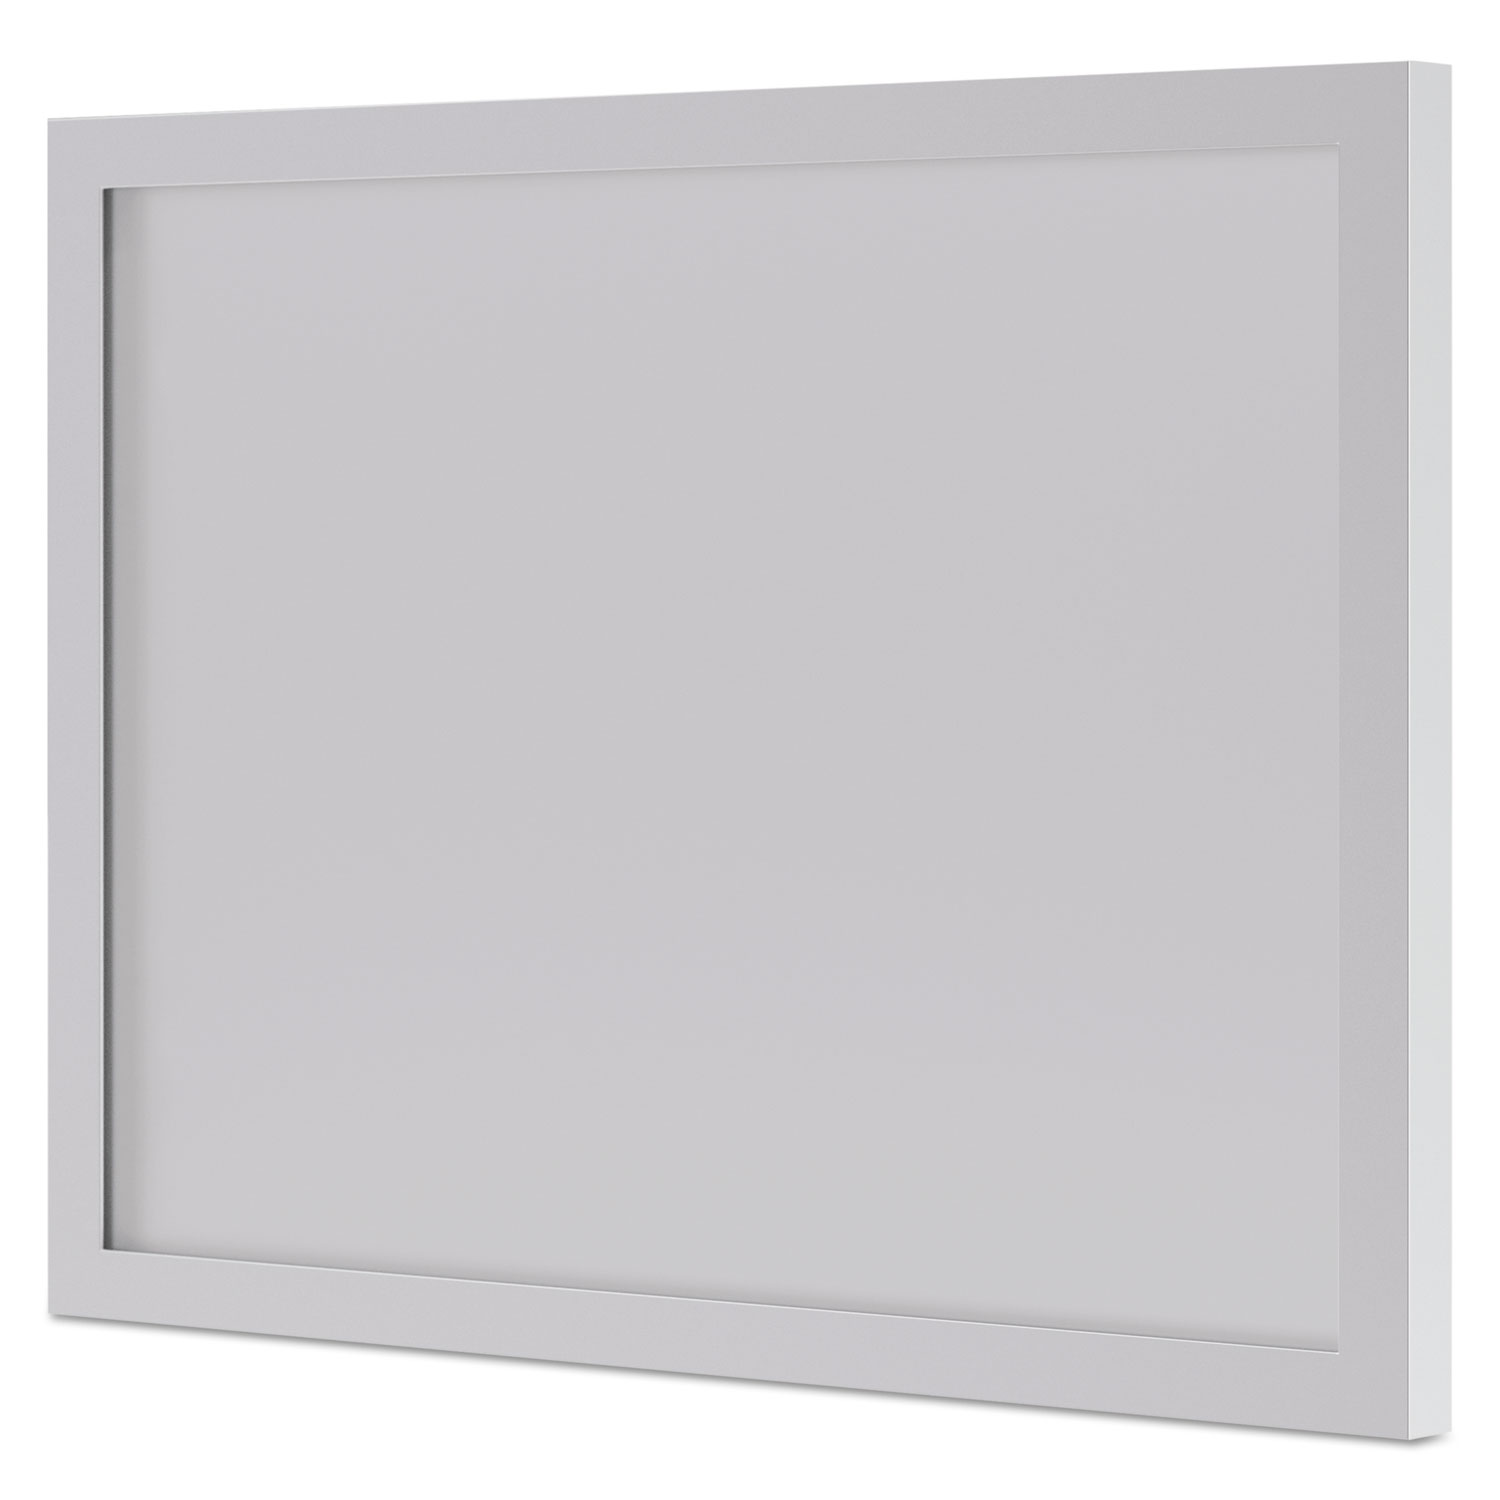  HON HBL72BFMODG BL Series Frosted Glass Modesty Panel, 39.5w x 0.13d x 27.25h, Silver/Frosted (BSXBLBF72MODG) 